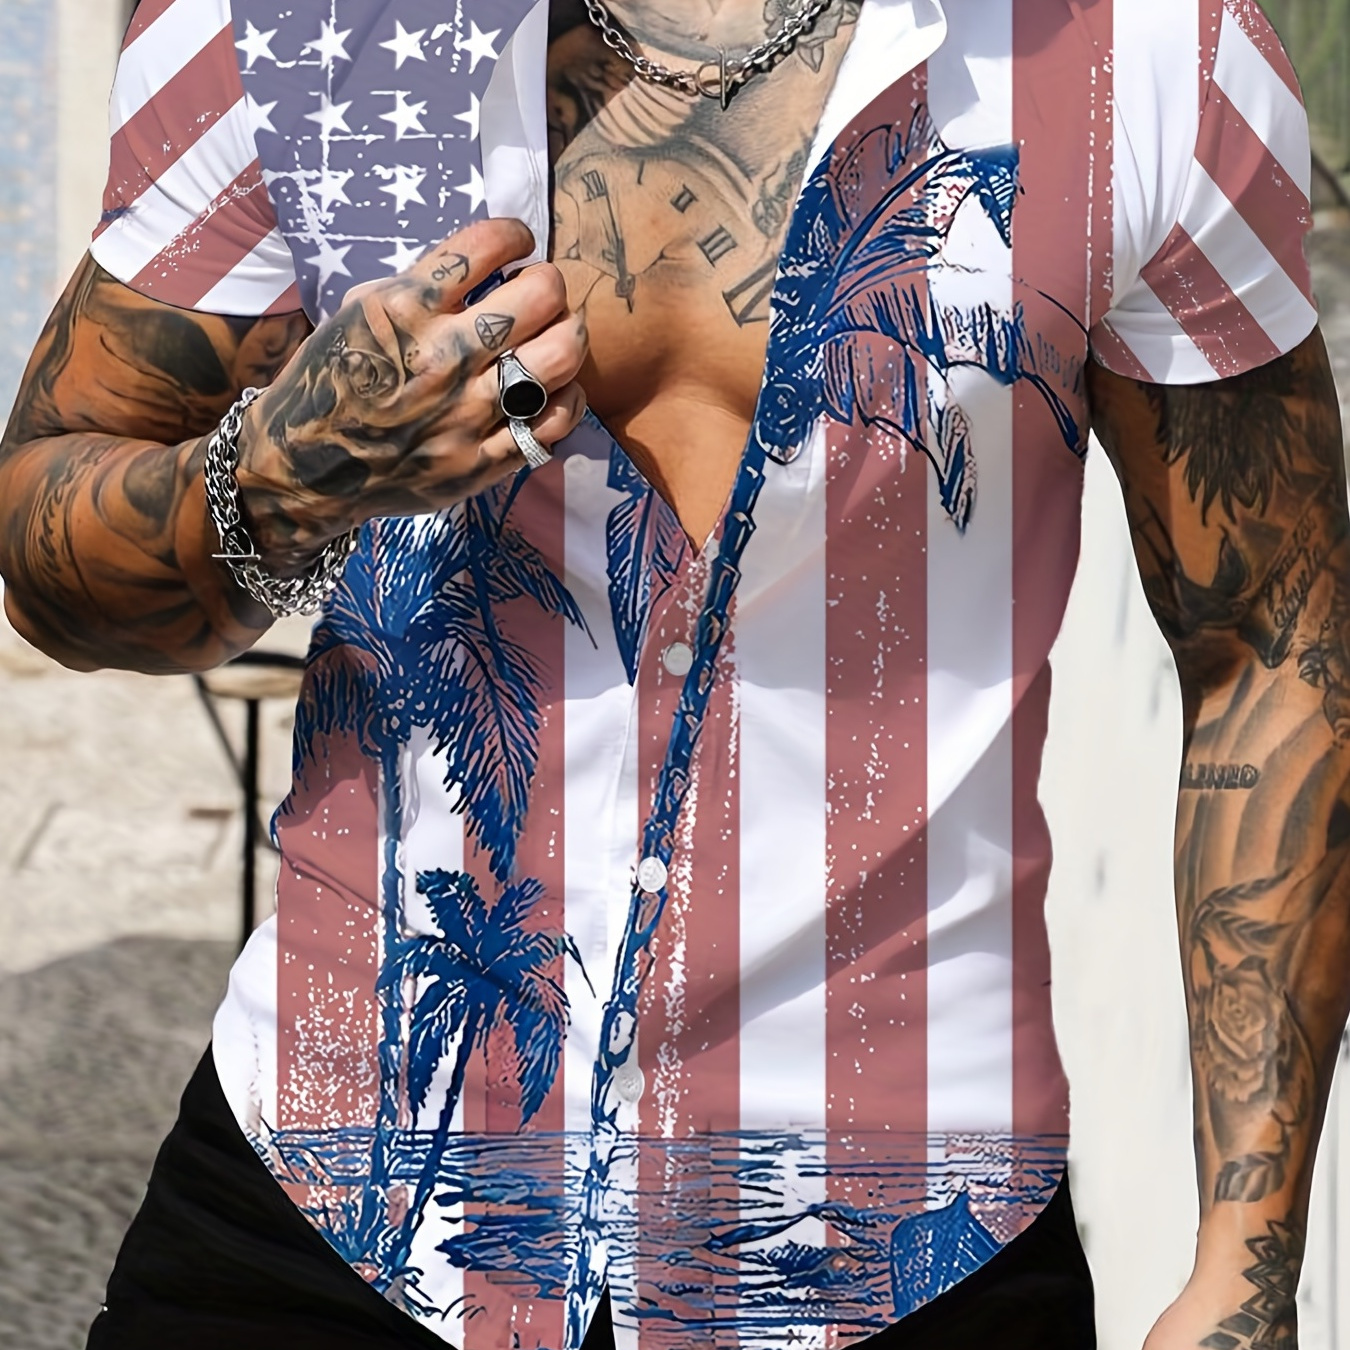 

Independence Day, American Flag 3d Digital Pattern Print Men's Graphic Shirts, Causal Comfy Tees, Short Sleeves Comfortable Tops, Men's Summer Clothing